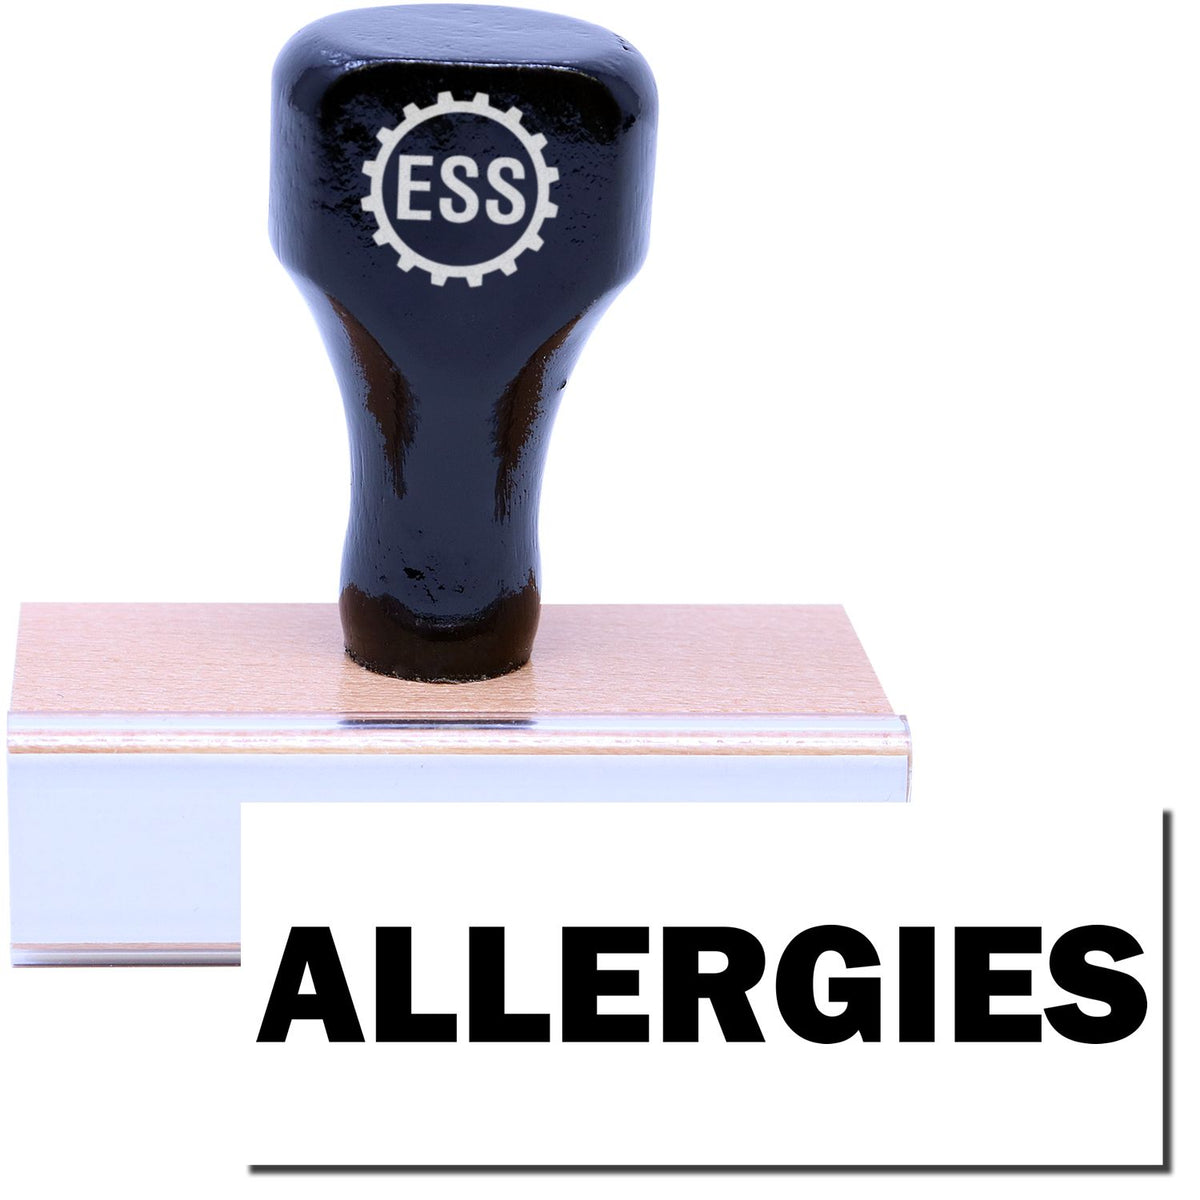 A stock office rubber stamp with a stamped image showing how the text &quot;ALLERGIES&quot; in a large bold font is displayed after stamping.